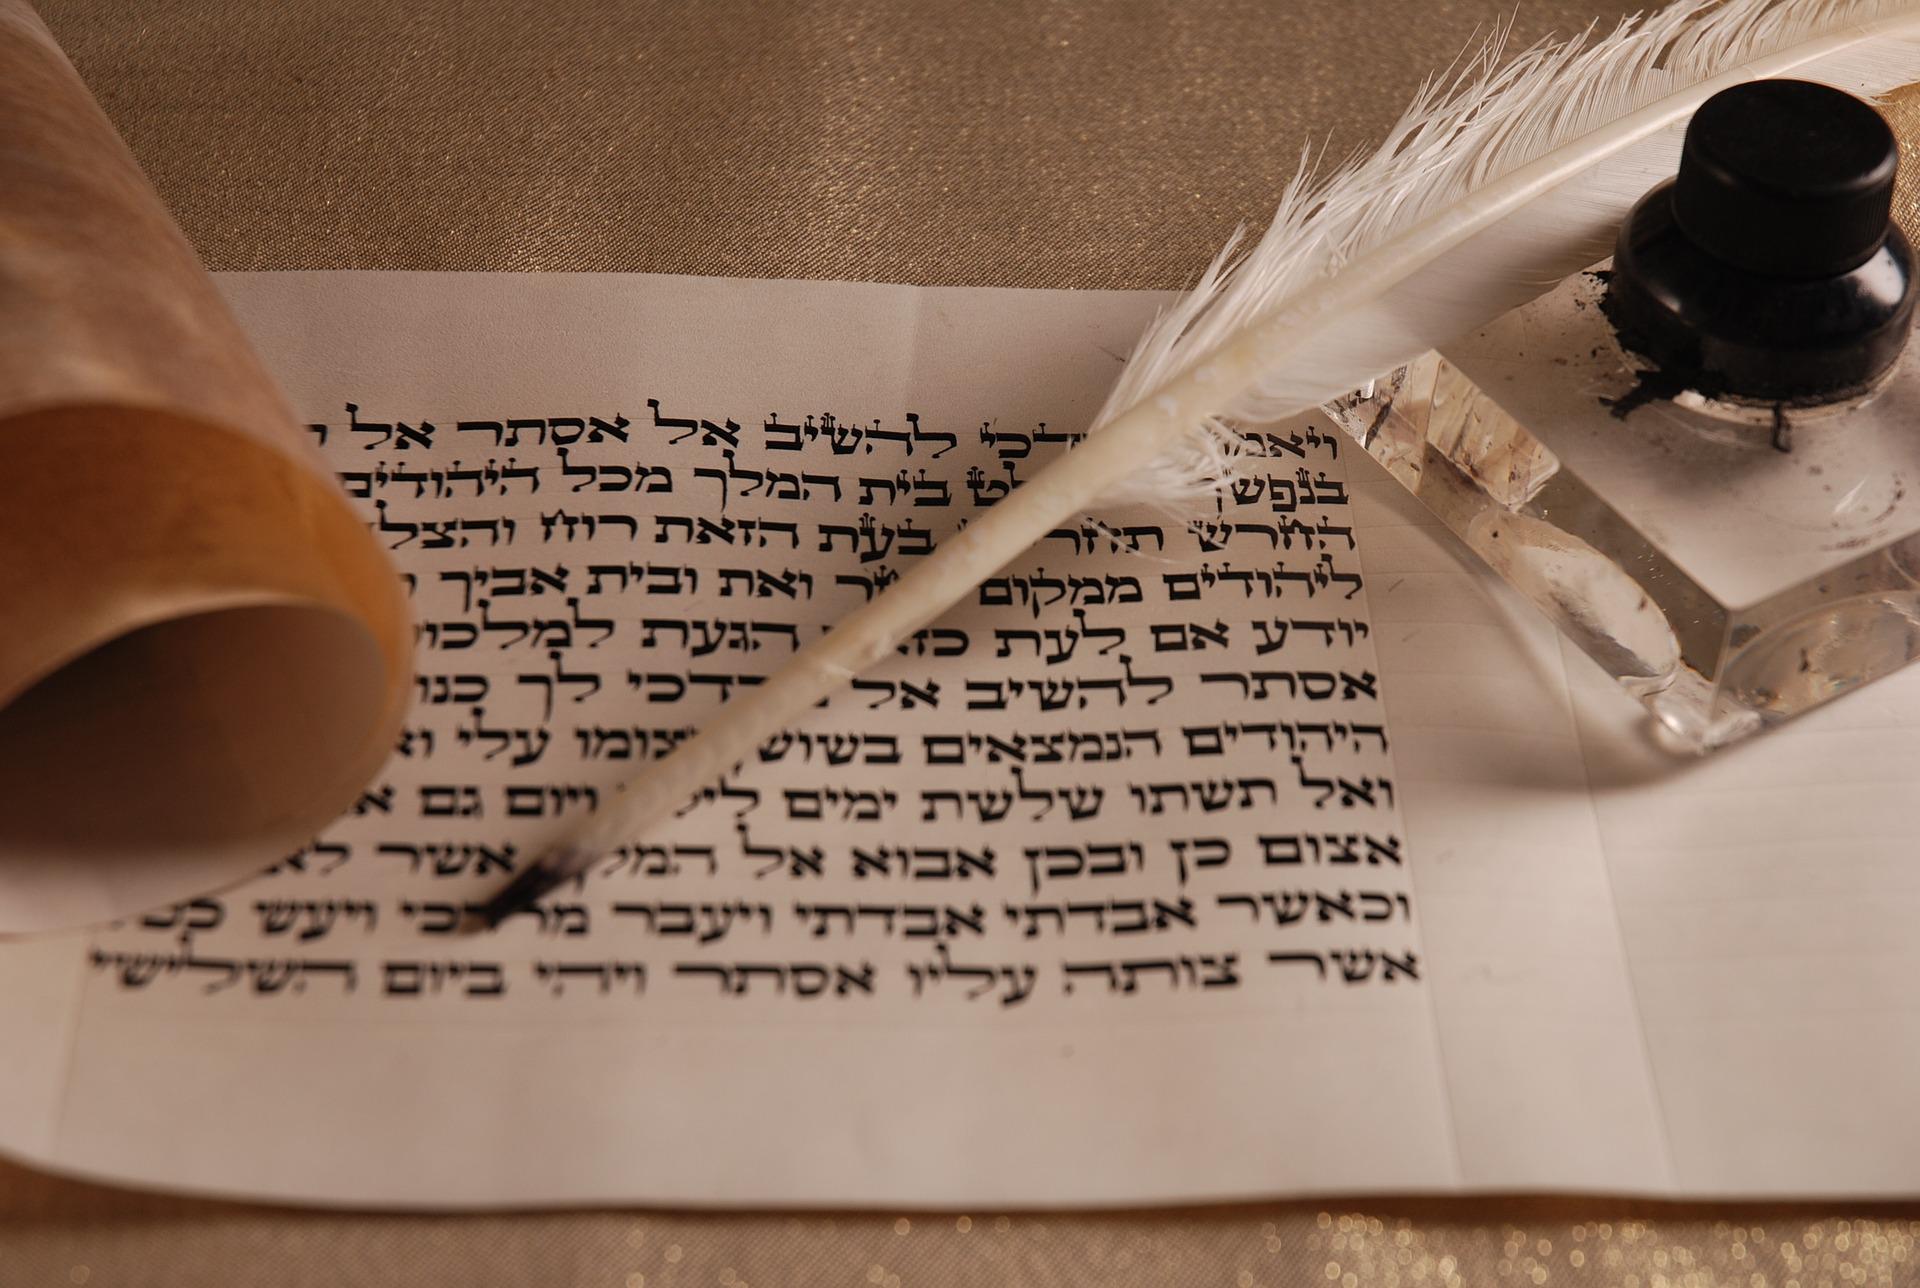 Who ate the scroll as instructed by the Lord?